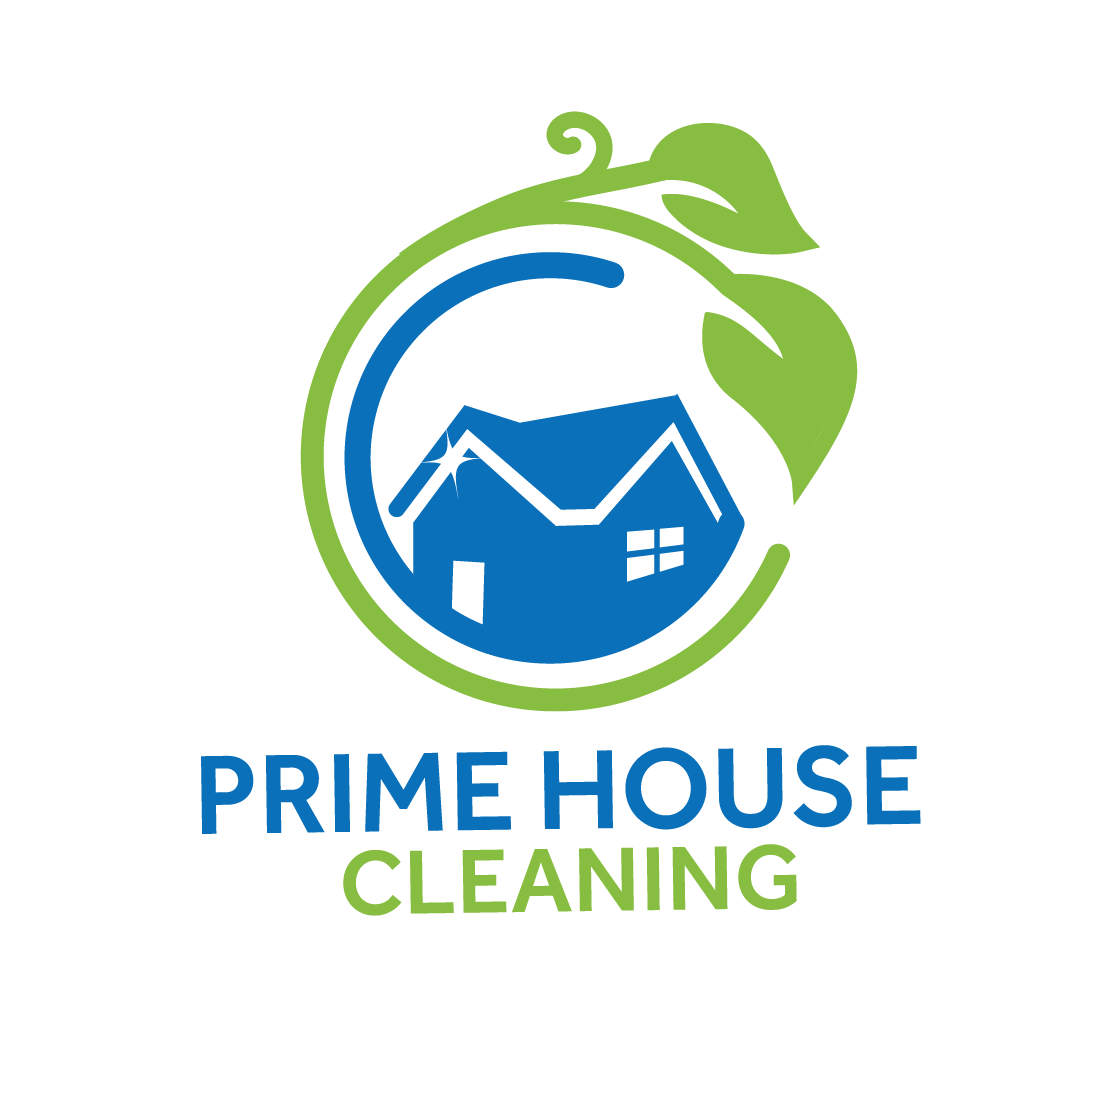 Prime House Cleaning Logo